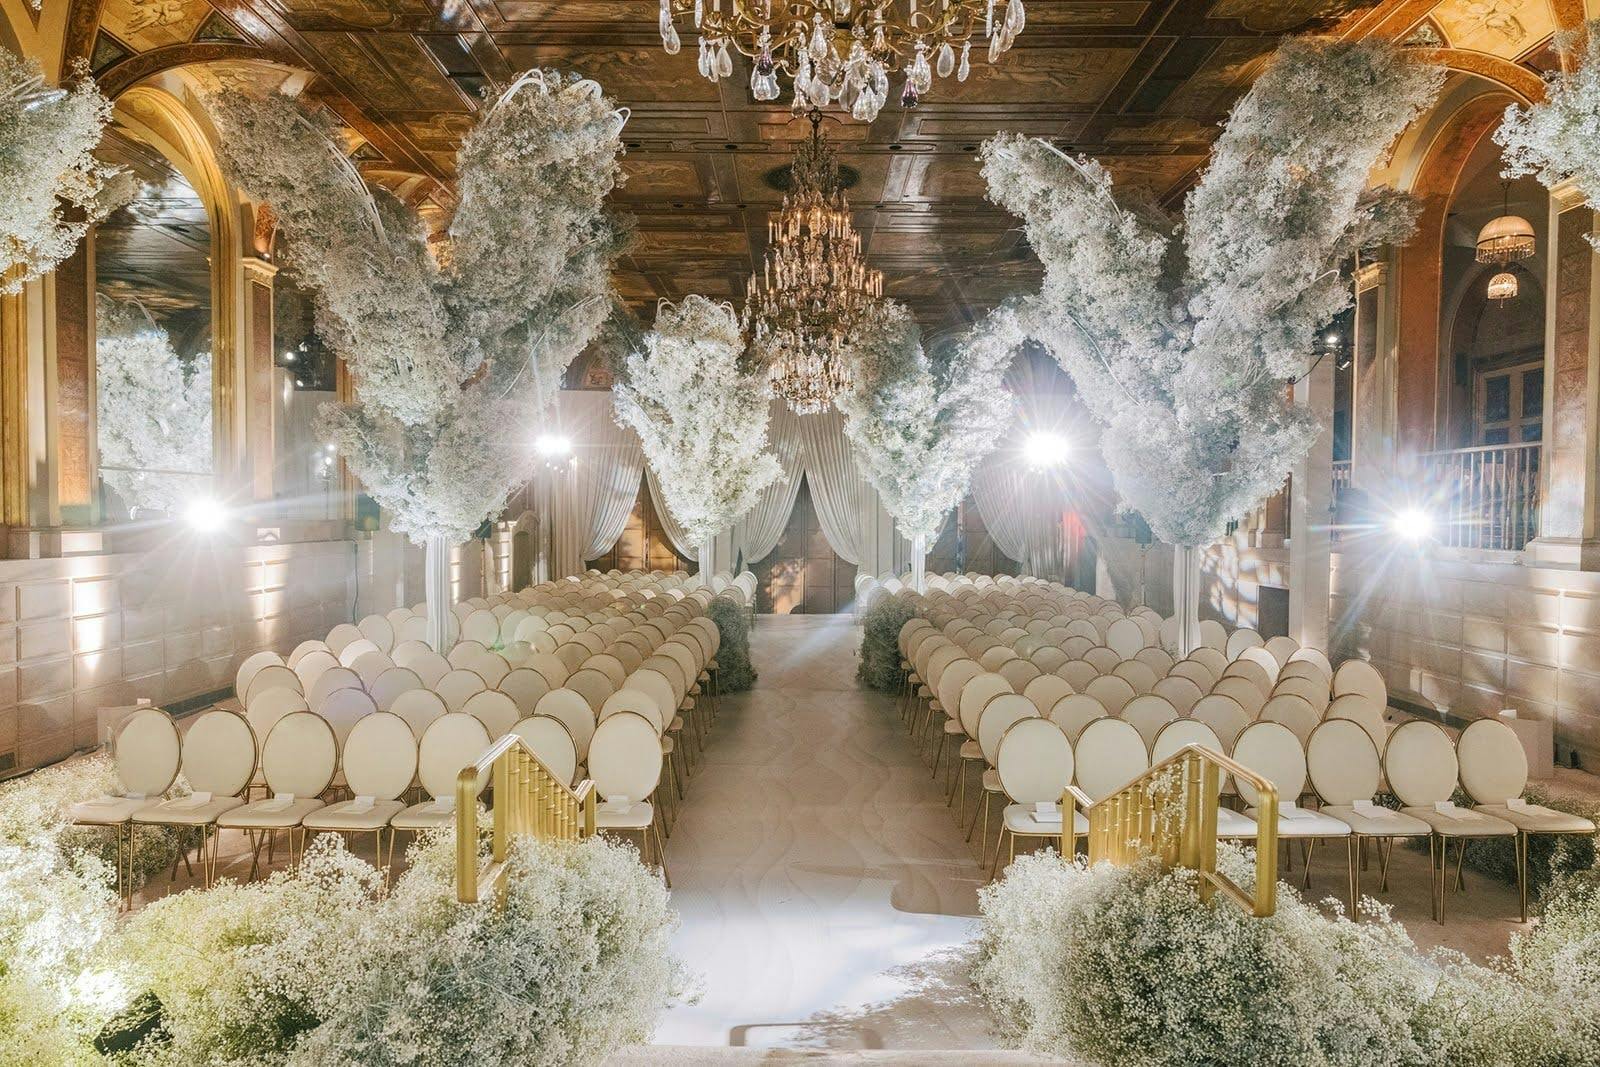 Inspiration for a Dreamy All White Wedding - Inspired By This